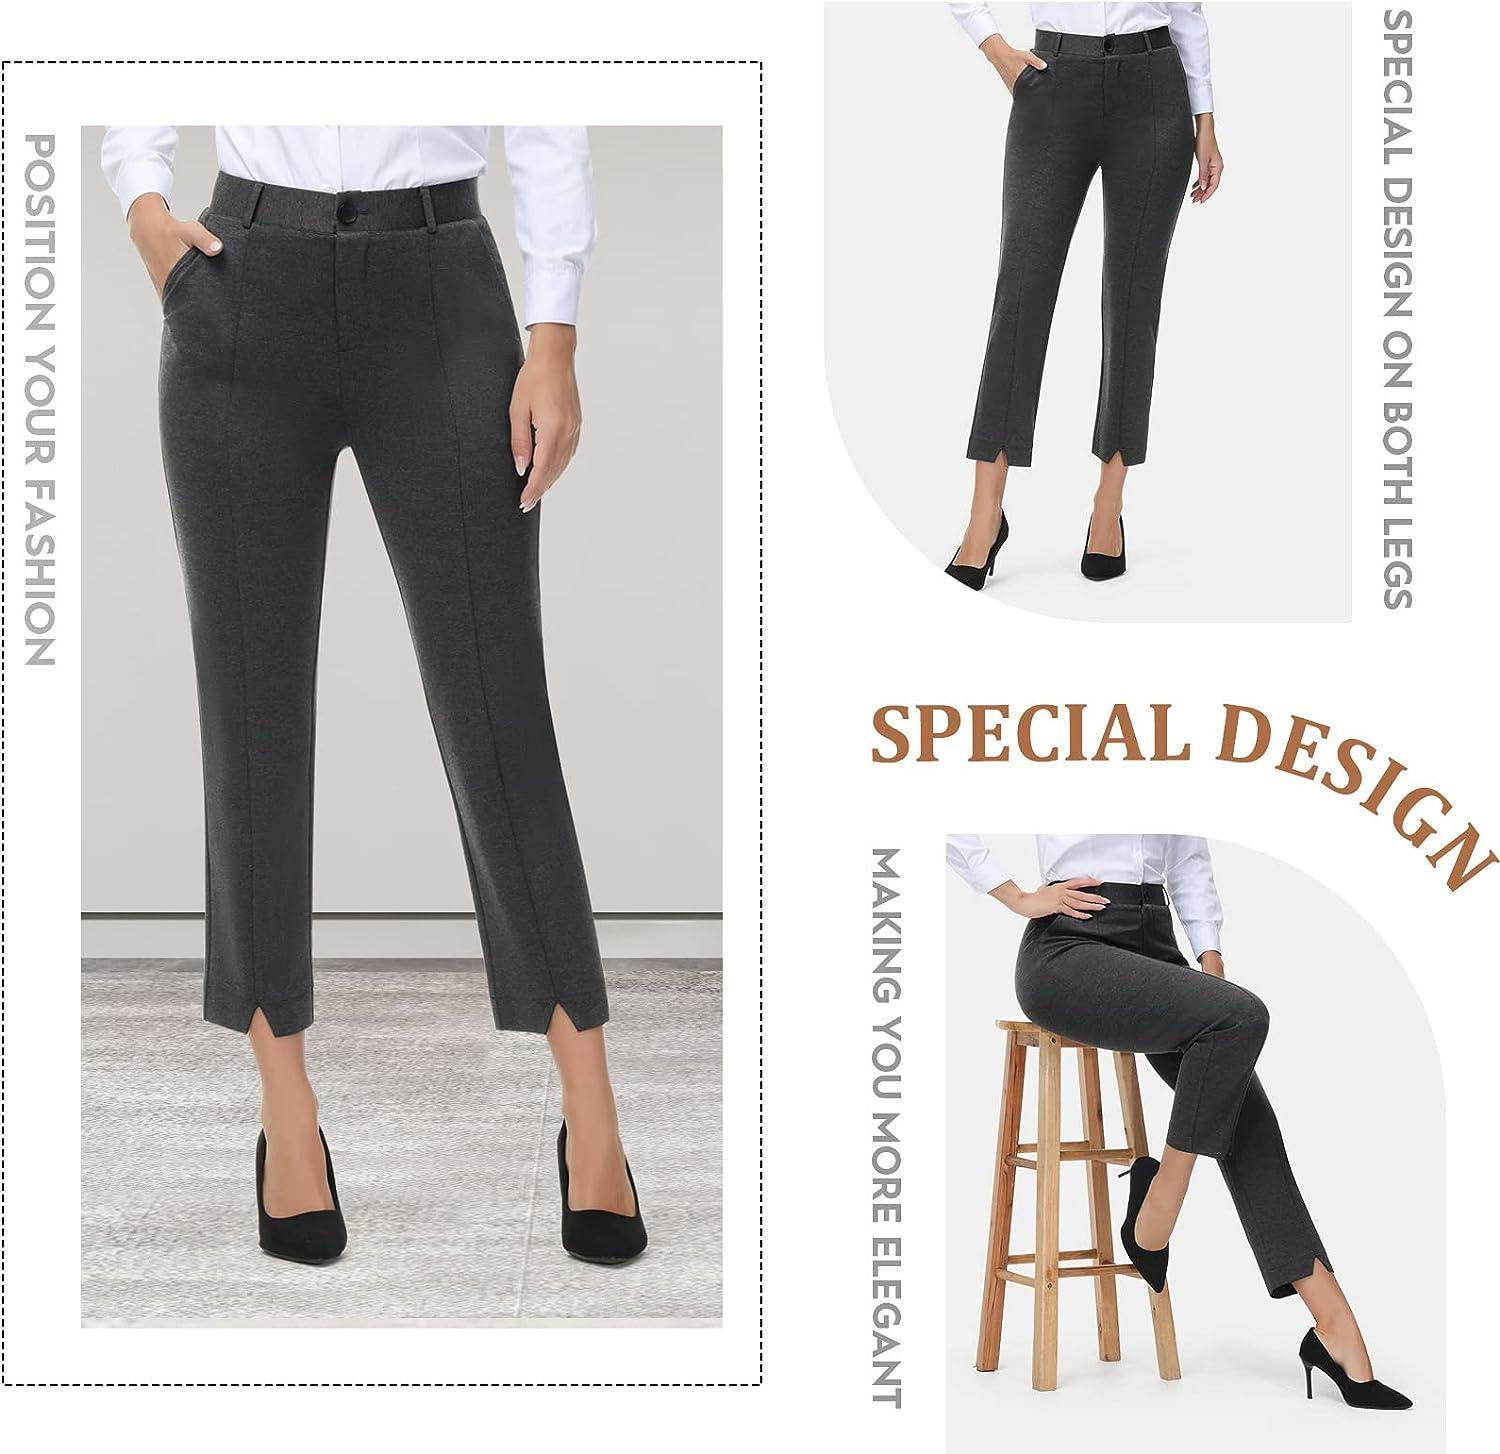  PUWEER Work Pants For Women, Stretch Dress Pants